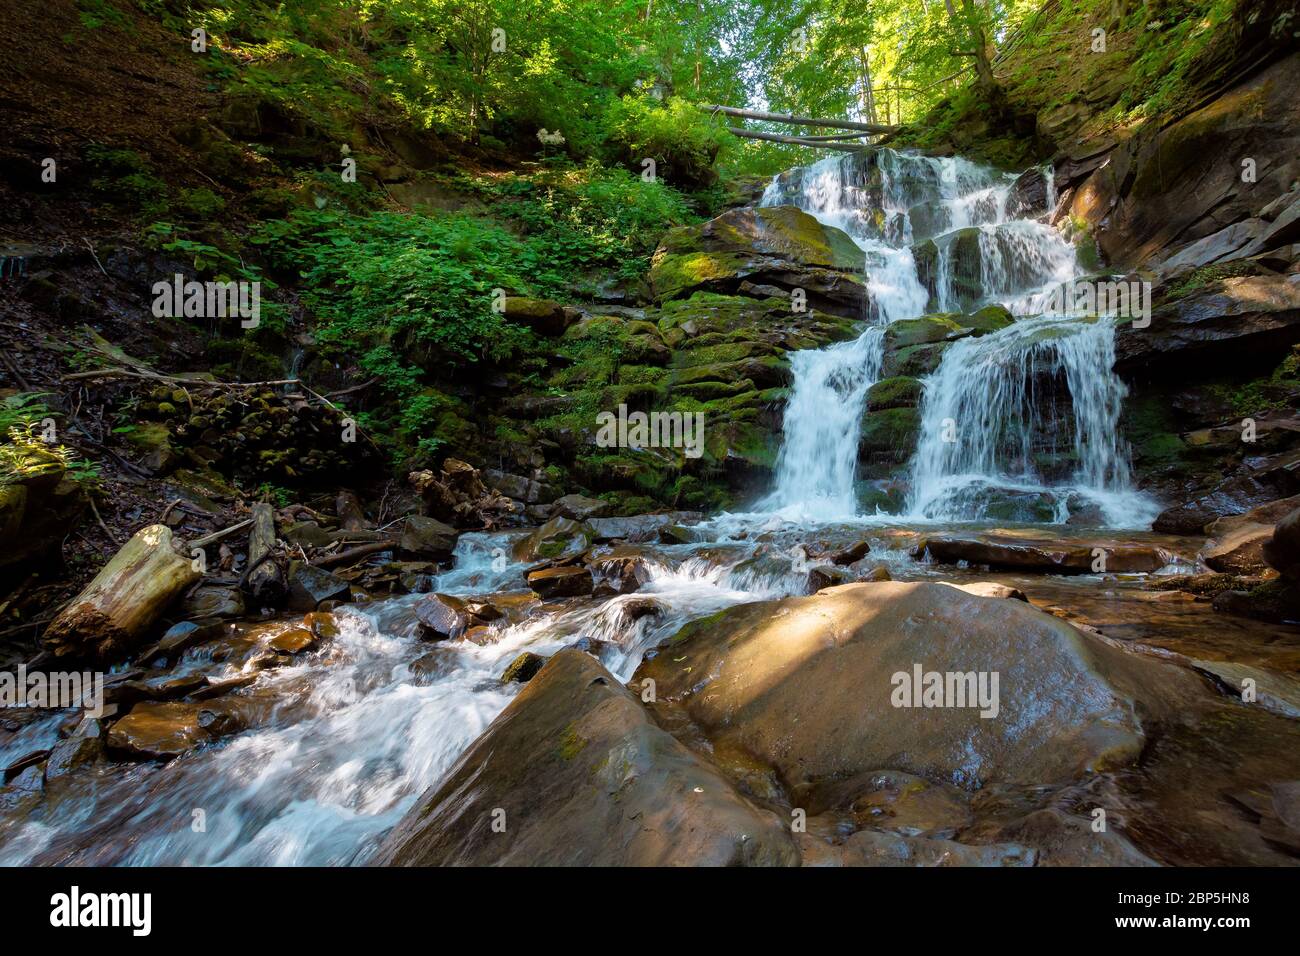 waterfall in the fores. rapid water of mountain river. beautiful nature background. calming summer landscape Stock Photo